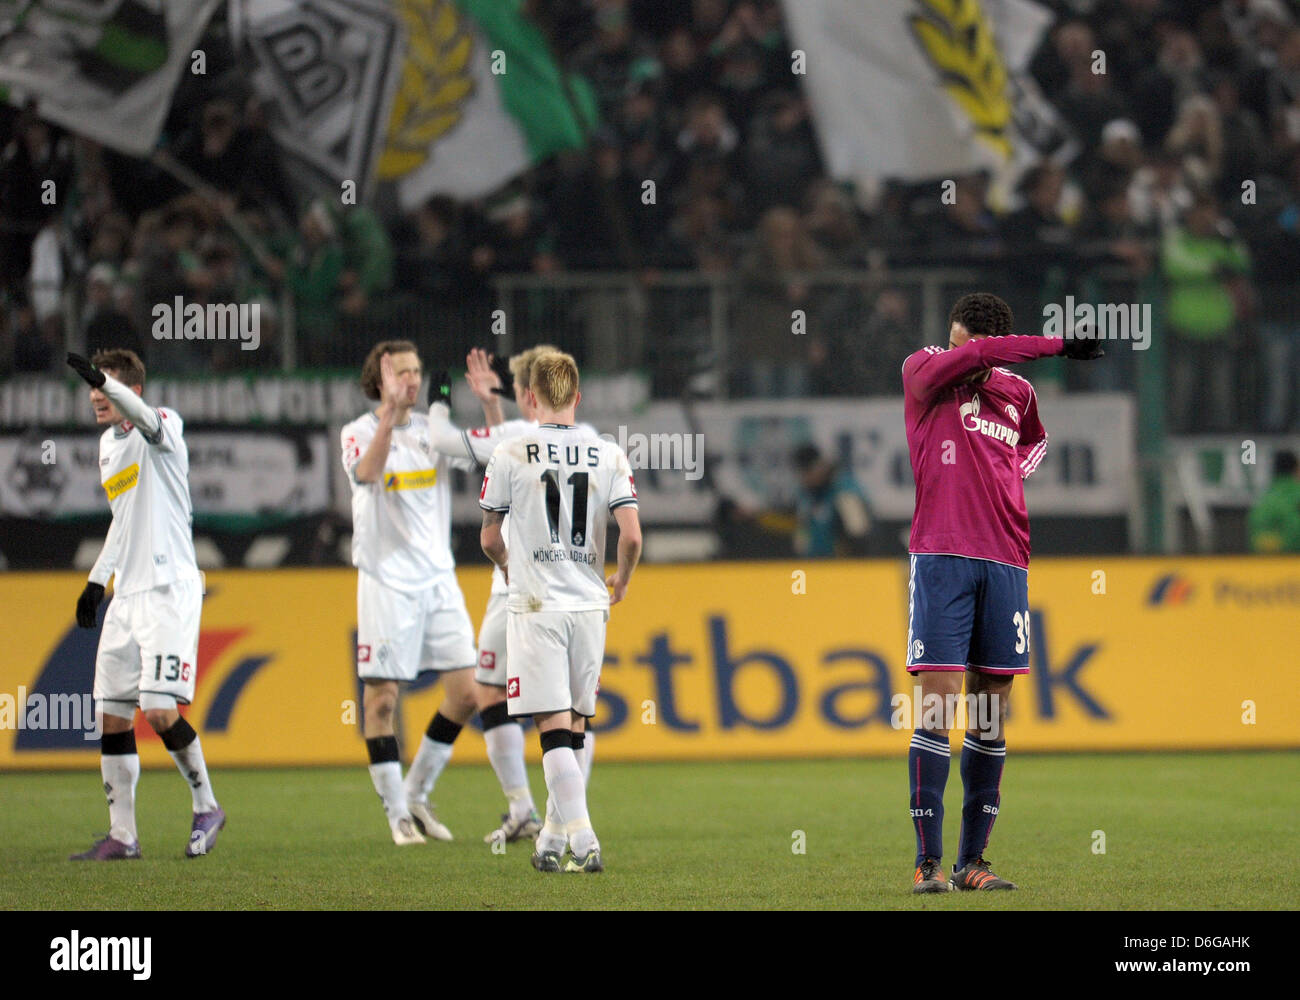 Schalke's Joel Matip (R) stands on the pitch while some of Gladbach's players celebrate after the German Bundesliga soccer match Borussia Moenchengladbach vs FC Schalke 04 at Borussia-Park in Moenchengladbach, Germany, 11 February 2012. Gladbach won 3:0. Photo: Federico Gambarini Stock Photo